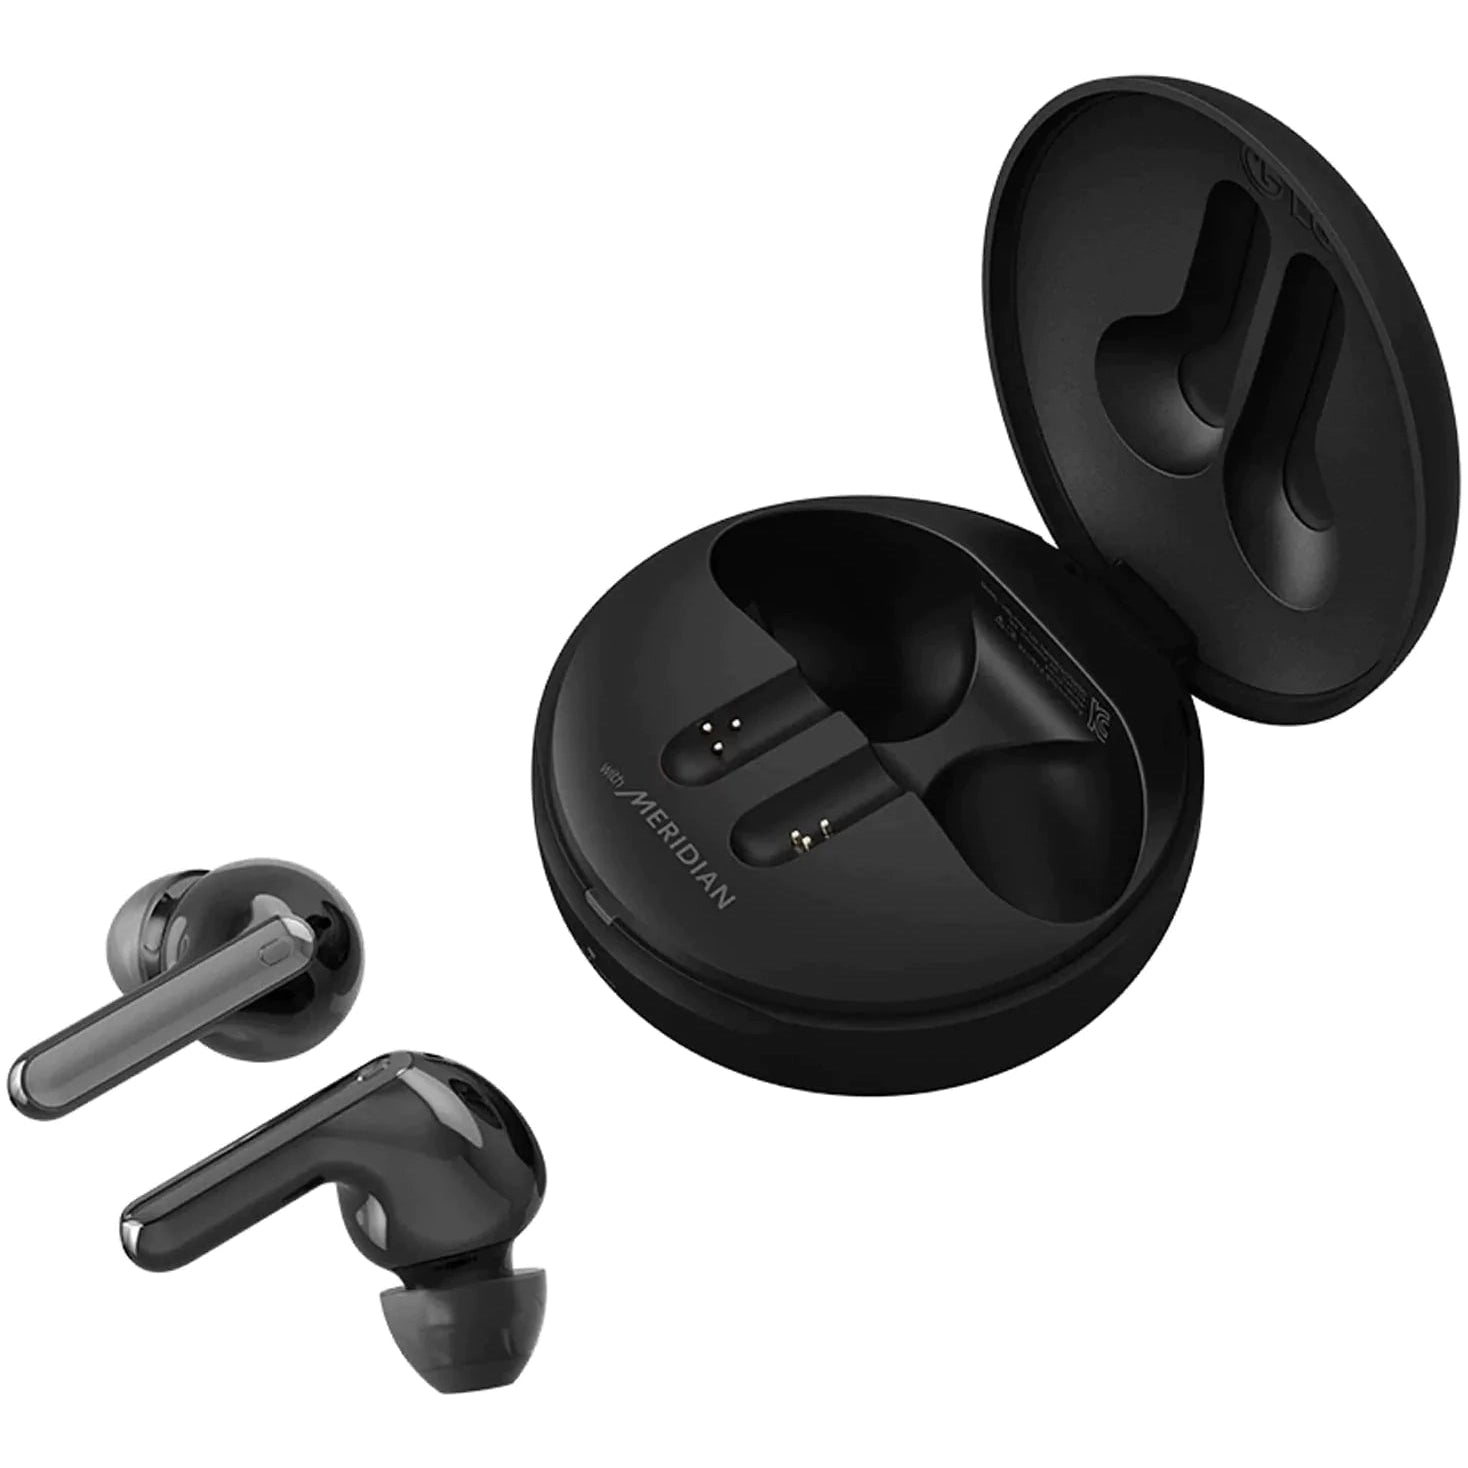 LG TONE Free HBS-FN7 True Wireless Earbuds - Refurbished Excellent